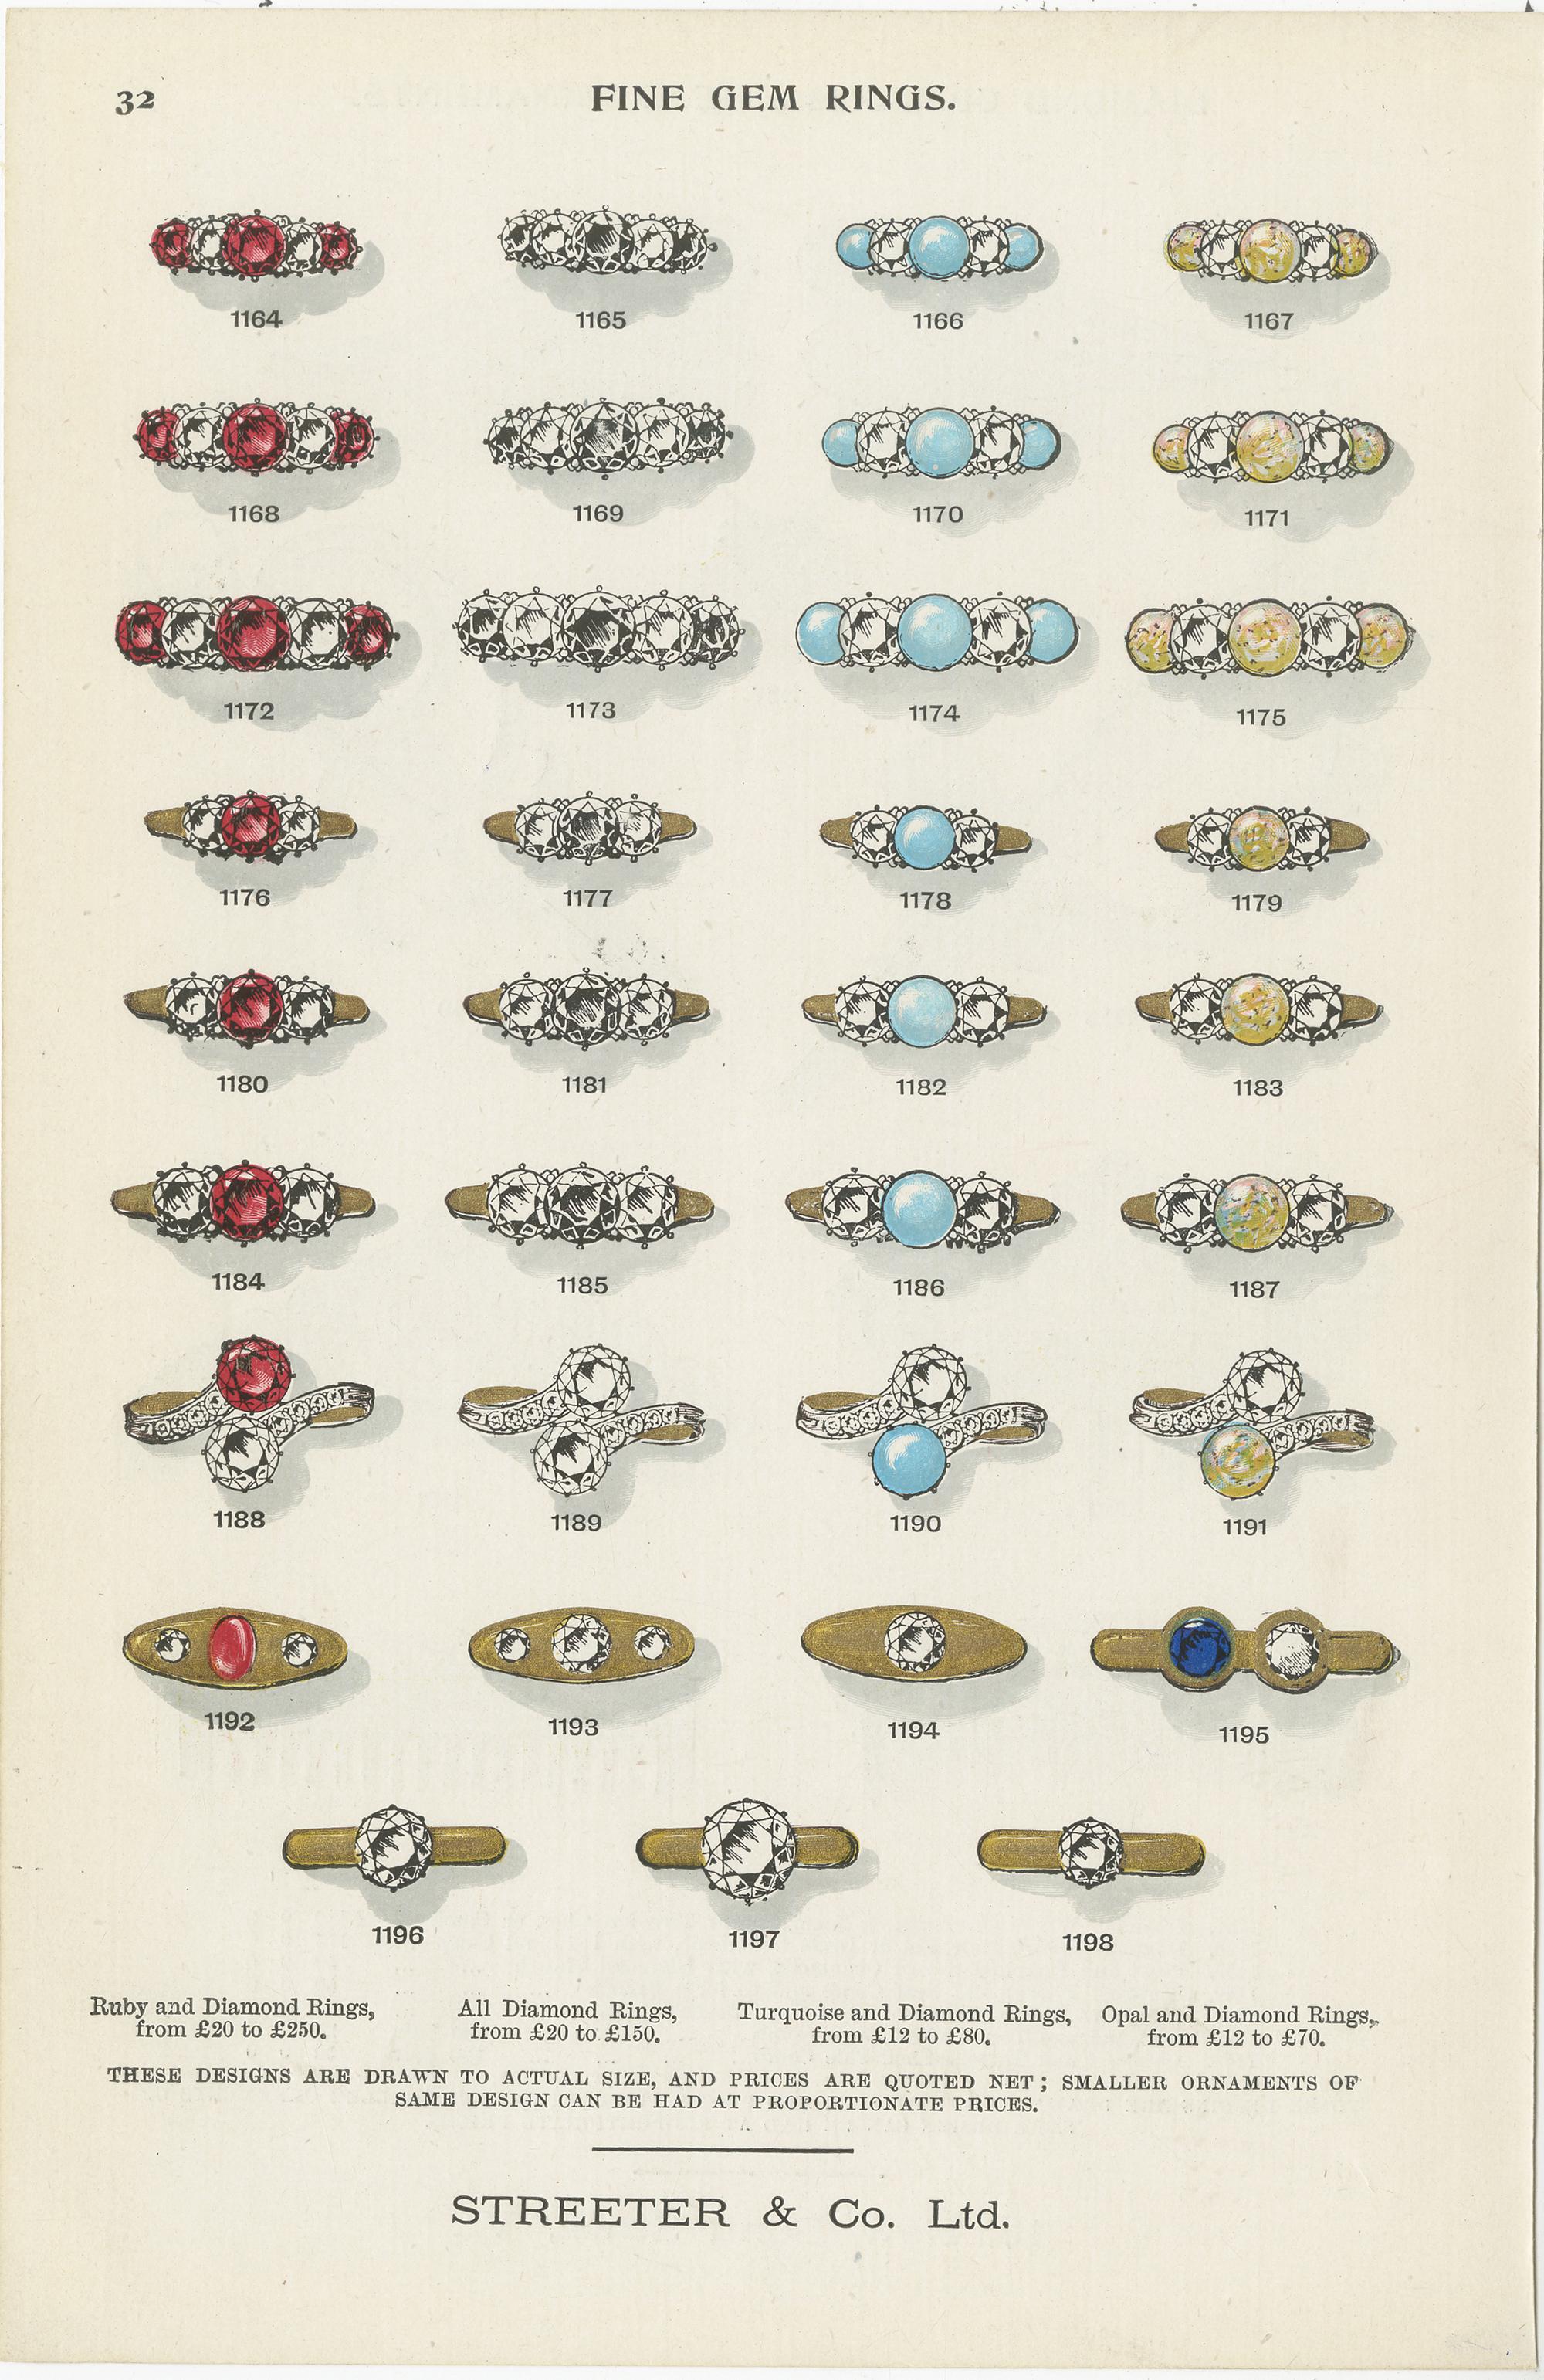 Set of two antique prints titled 'Fine Gem Rings'. Two original chromolithographic plates of fine gem rings. These prints originate from 'Gems', a catalog containing fascinating essays on 31 individual gem stones, as well as on heraldry, and the